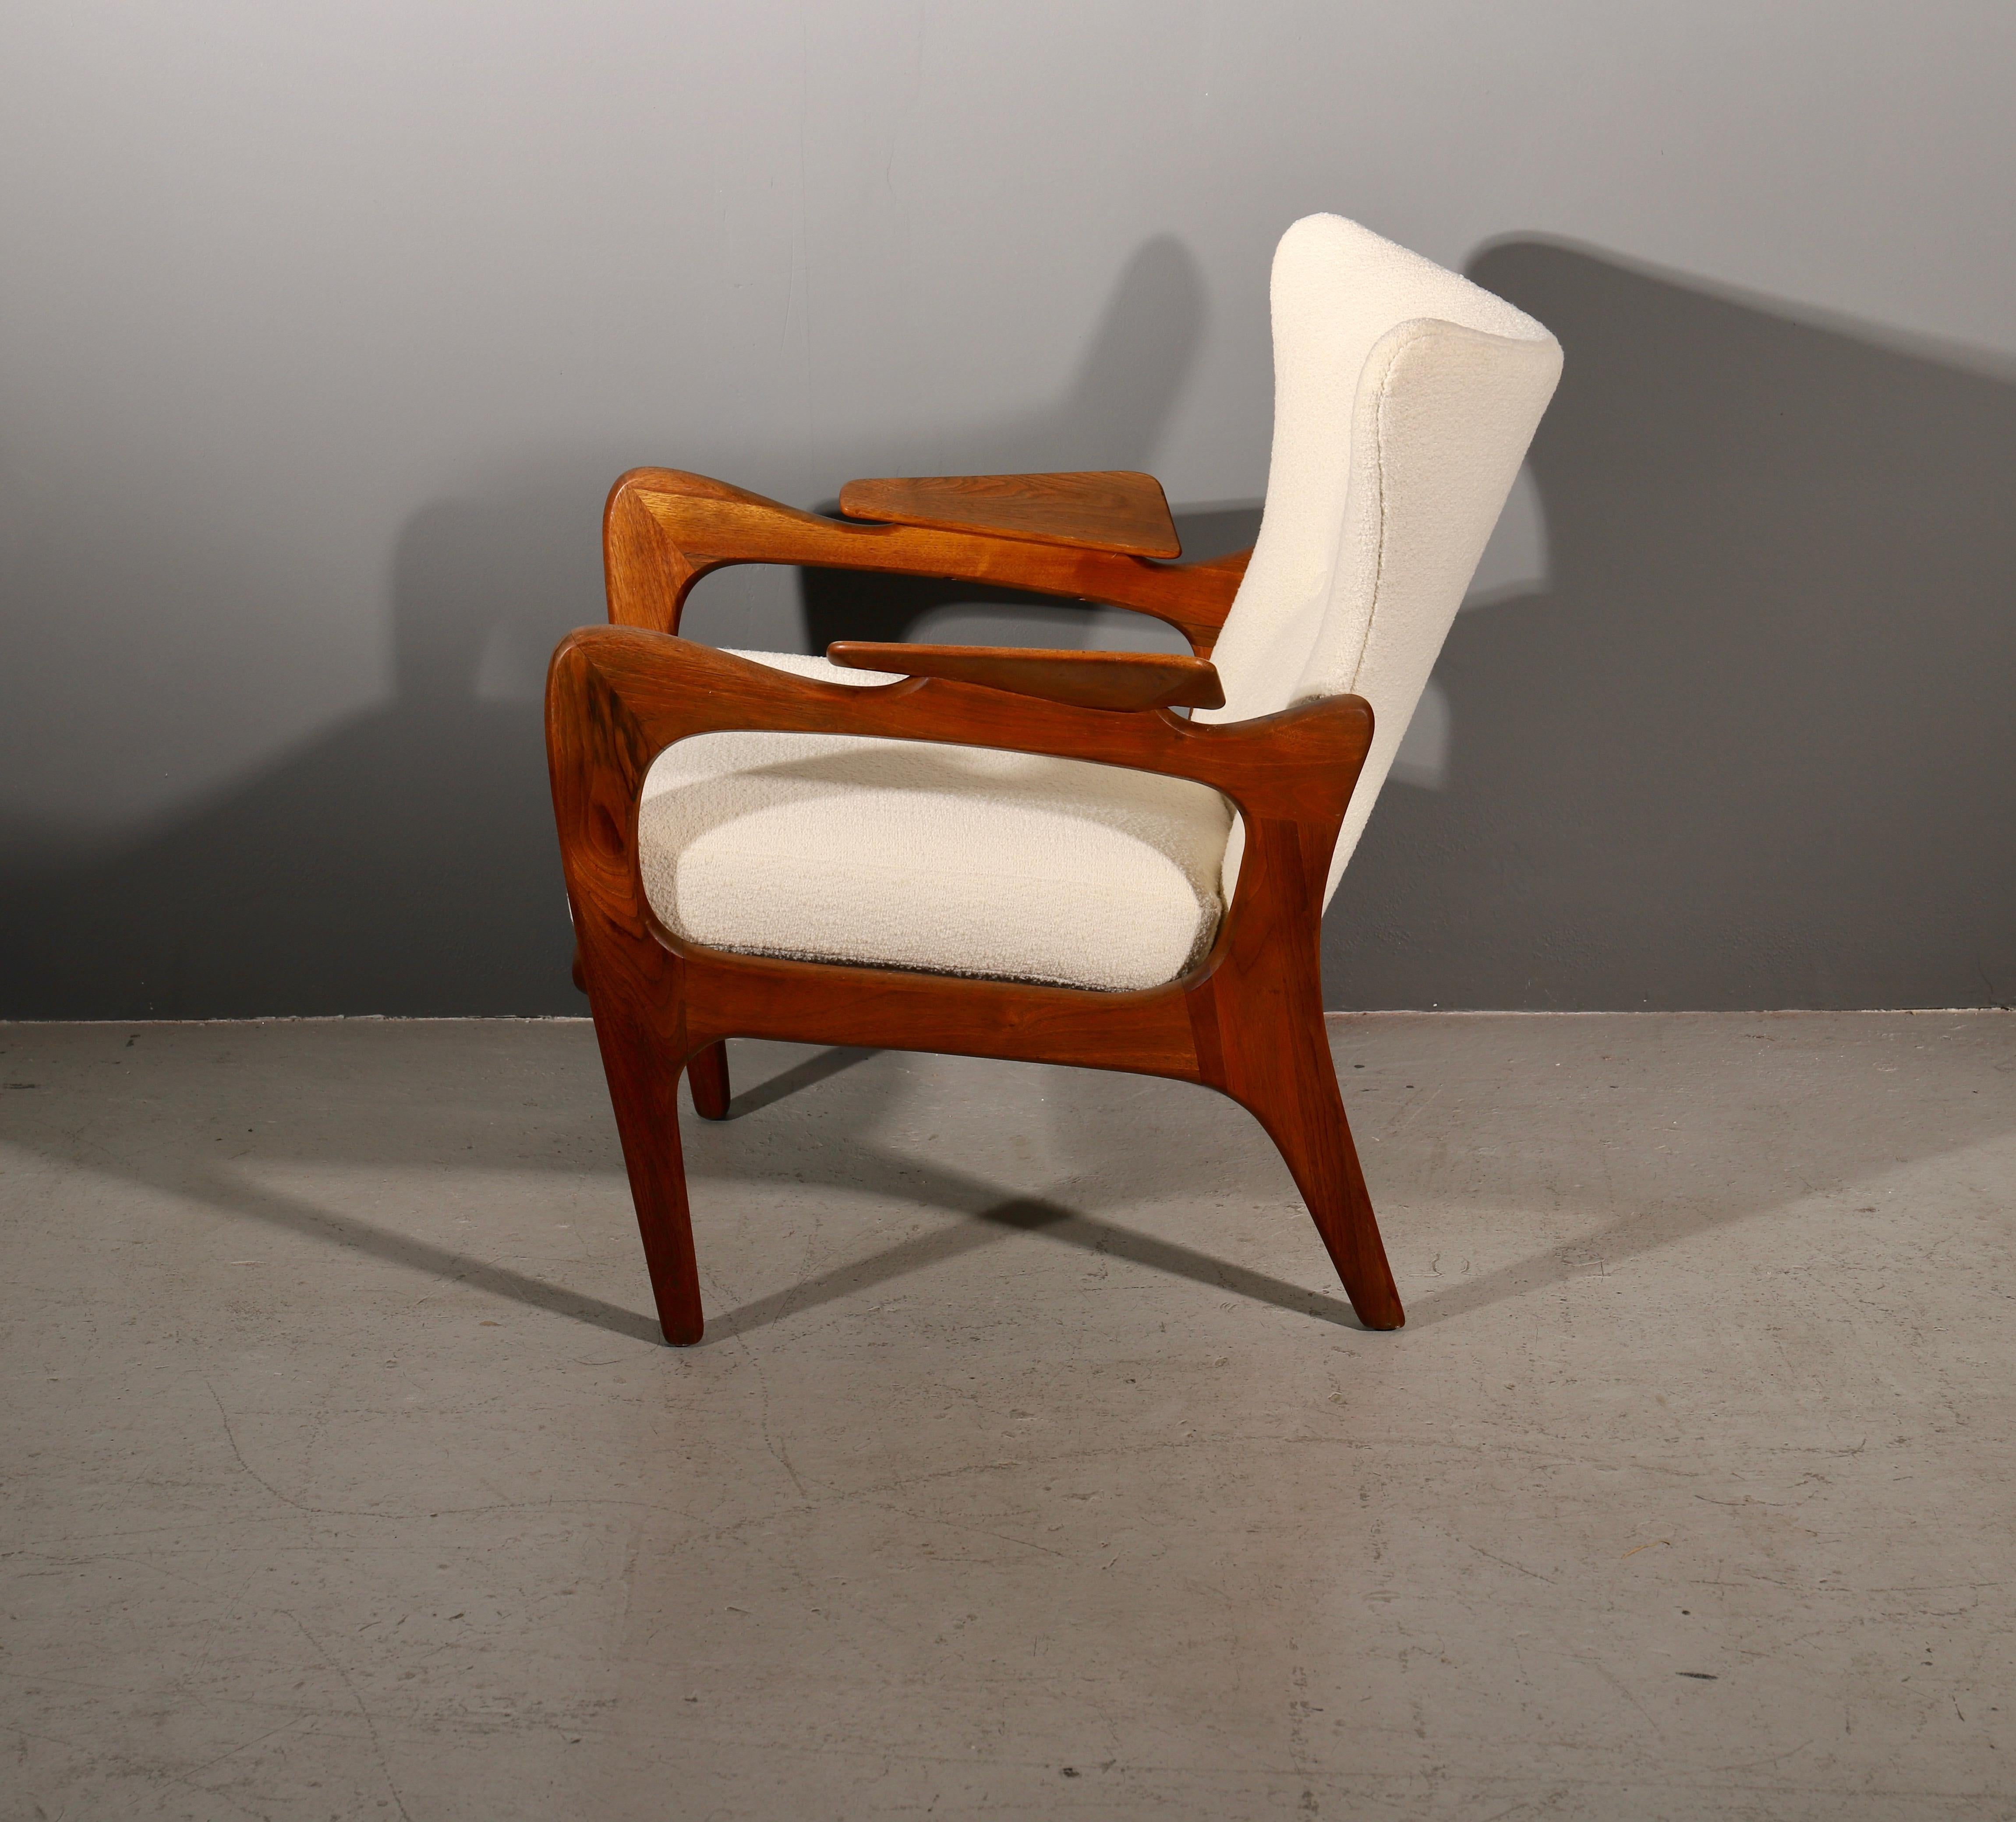 American Pair of Sculptural Adrian Pearsall Walnut Chairs, 1960s